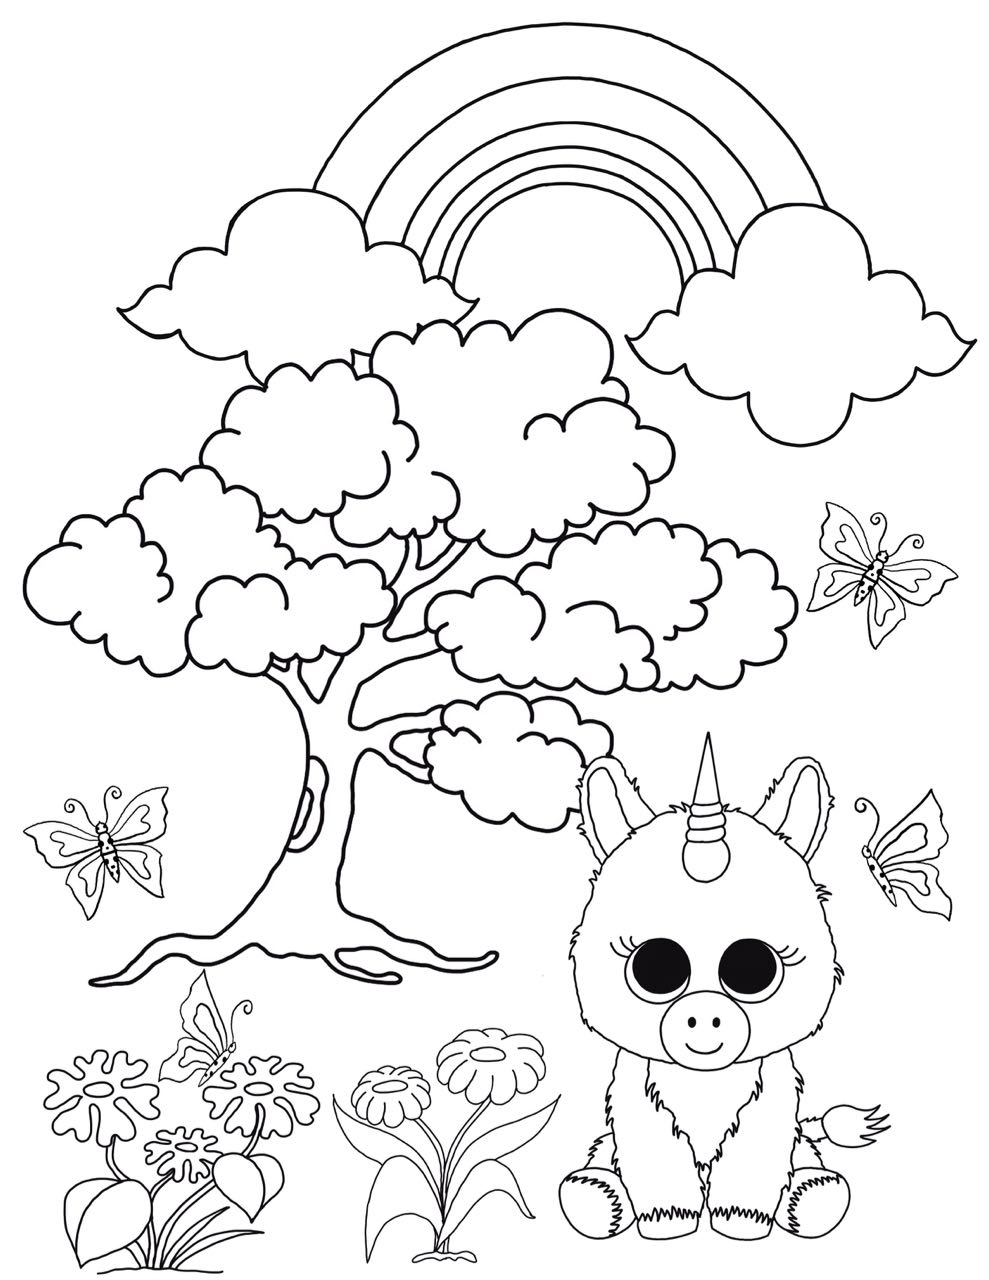 coloring ~ Coloring Beanie Boo Printable Pages Free Download ...